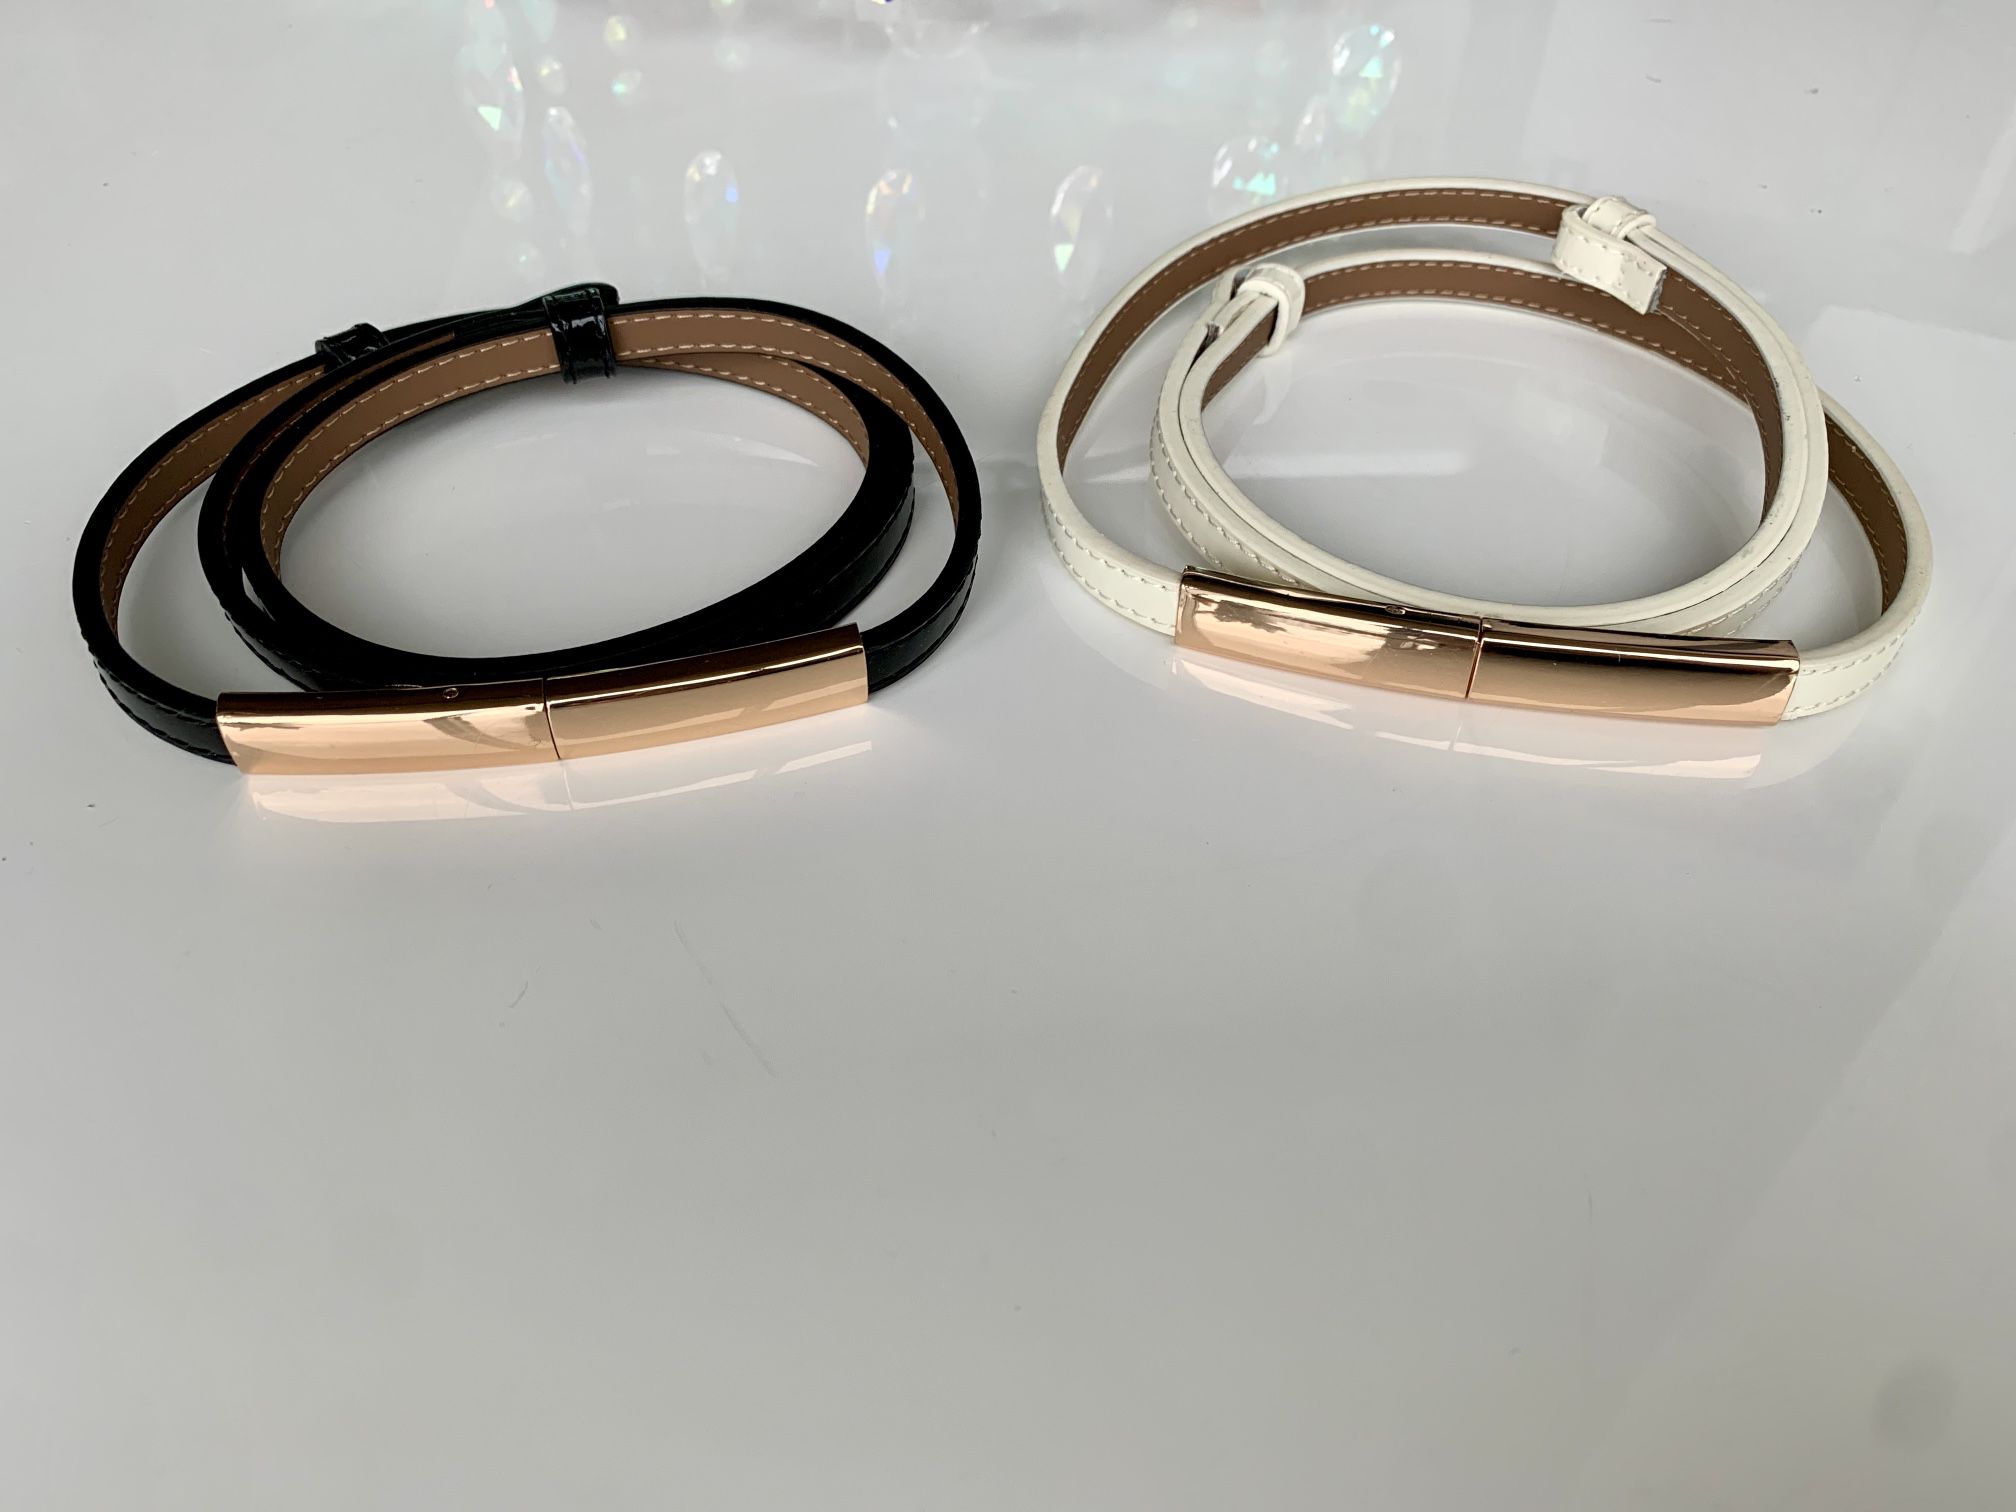 Like New, Two Thin Belts, Black and White with Gold Hardware, Adjustable Size XS, Small to Medium